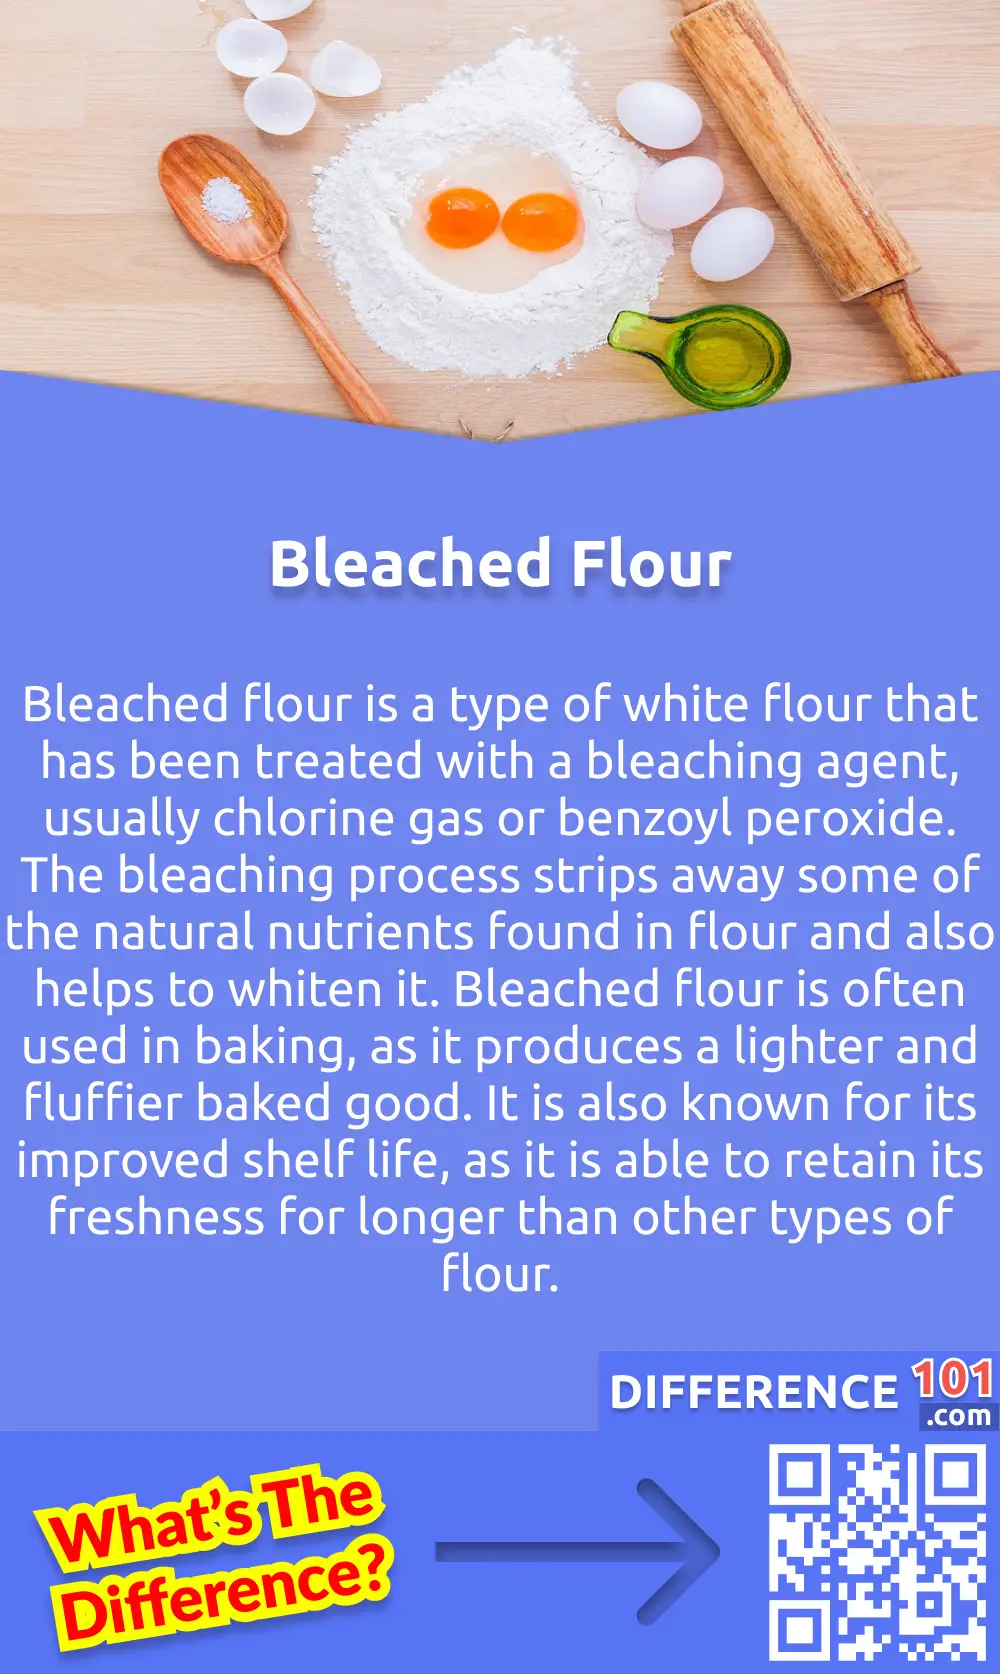 What Is Bleached Flour? Bleached flour is a type of white flour that has been treated with a bleaching agent, usually chlorine gas or benzoyl peroxide. The bleaching process strips away some of the natural nutrients found in flour and also helps to whiten it. Bleached flour is often used in baking, as it produces a lighter and fluffier baked good. It is also known for its improved shelf life, as it is able to retain its freshness for longer than other types of flour. Additionally, bleached flour has a slightly different taste and texture than unbleached flour, and it is often preferred for its finer, more uniform particles. While bleached flour is often used in commercial baking applications, it should be used with caution when making homemade baked goods, as it can alter the flavor profile and texture of the finished product.  